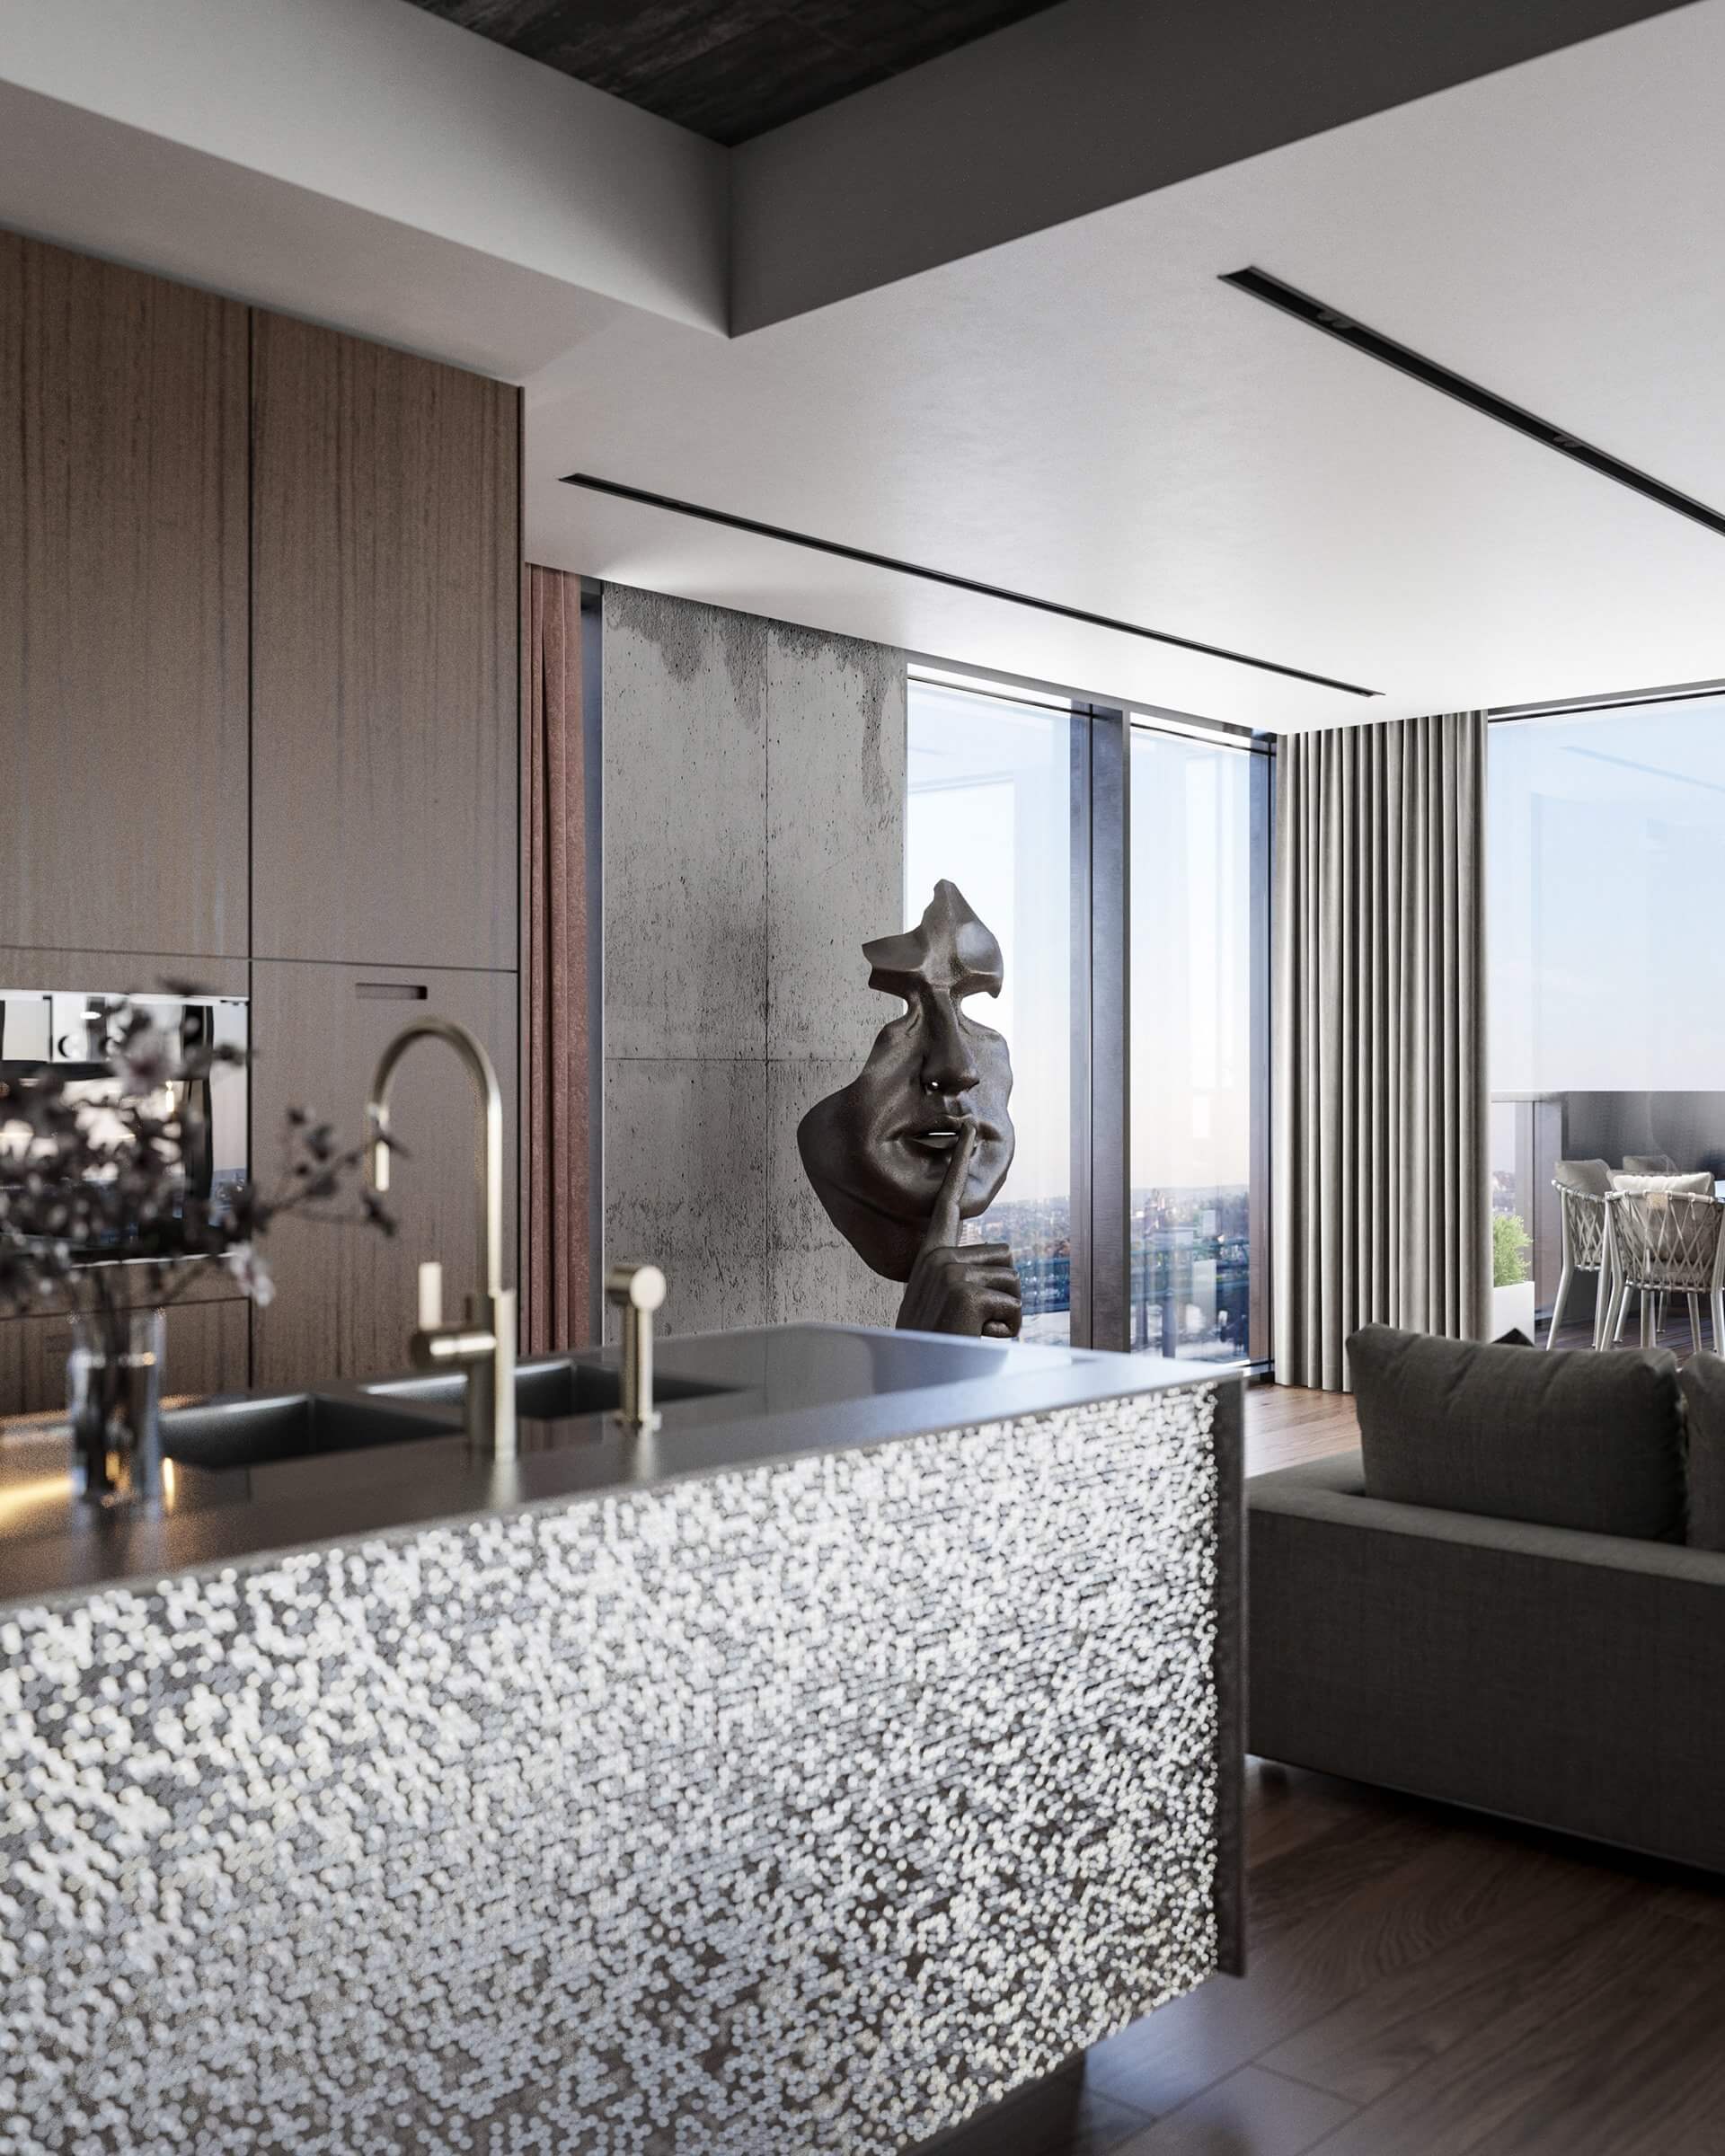 Interior Apartment project Pluses living room sculpture brass - cgi visualization